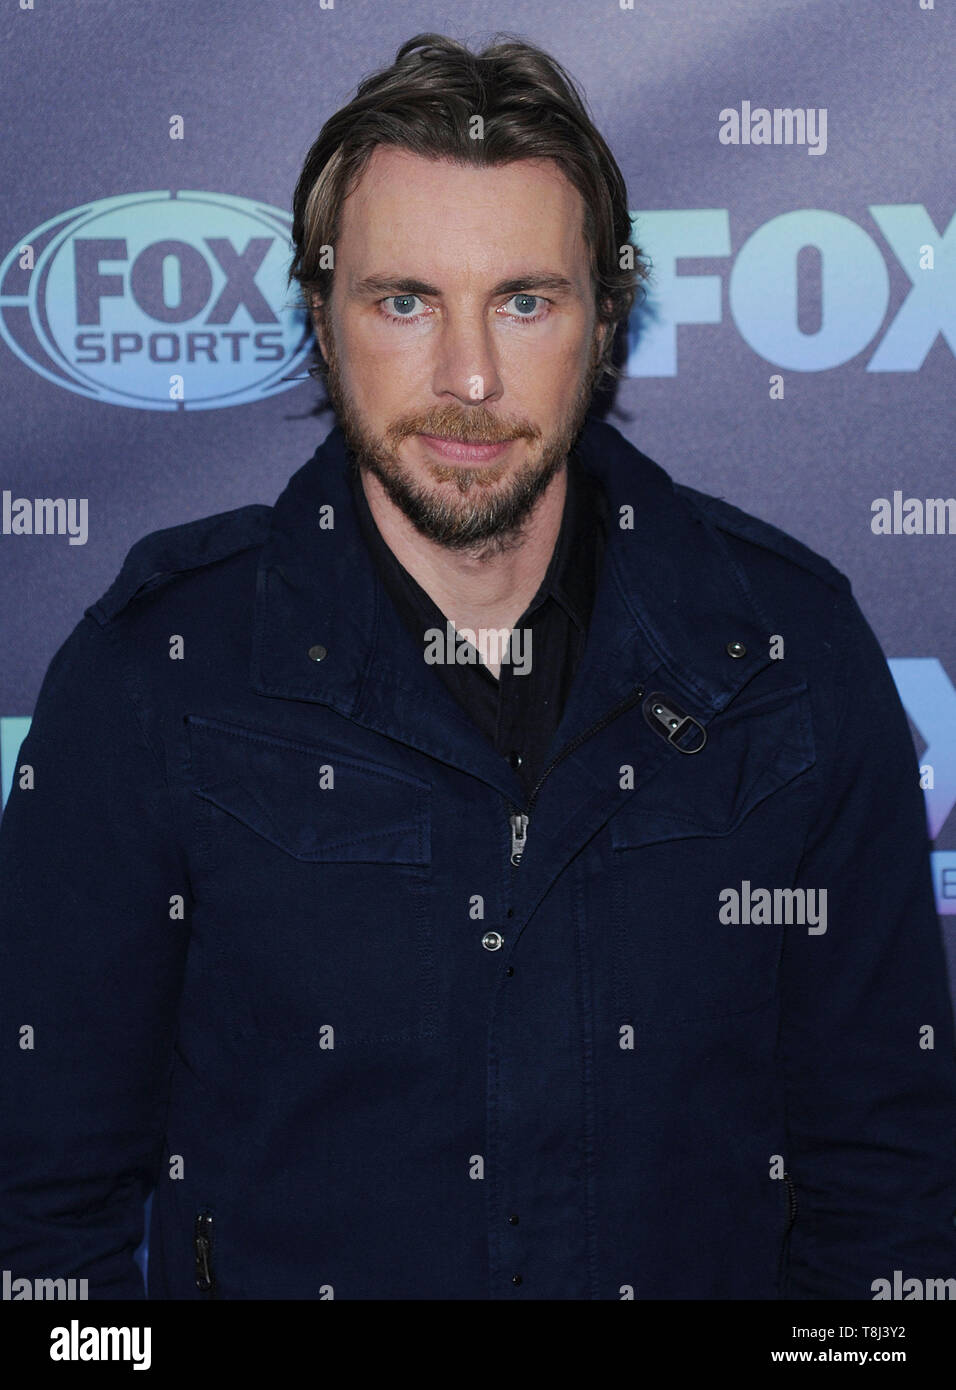 New York, USA. 13th May 2019. 2019 Fox Upfront Pictured: Dax Shepard Credit: Broadimage Entertainment/Alamy Live News Stock Photo